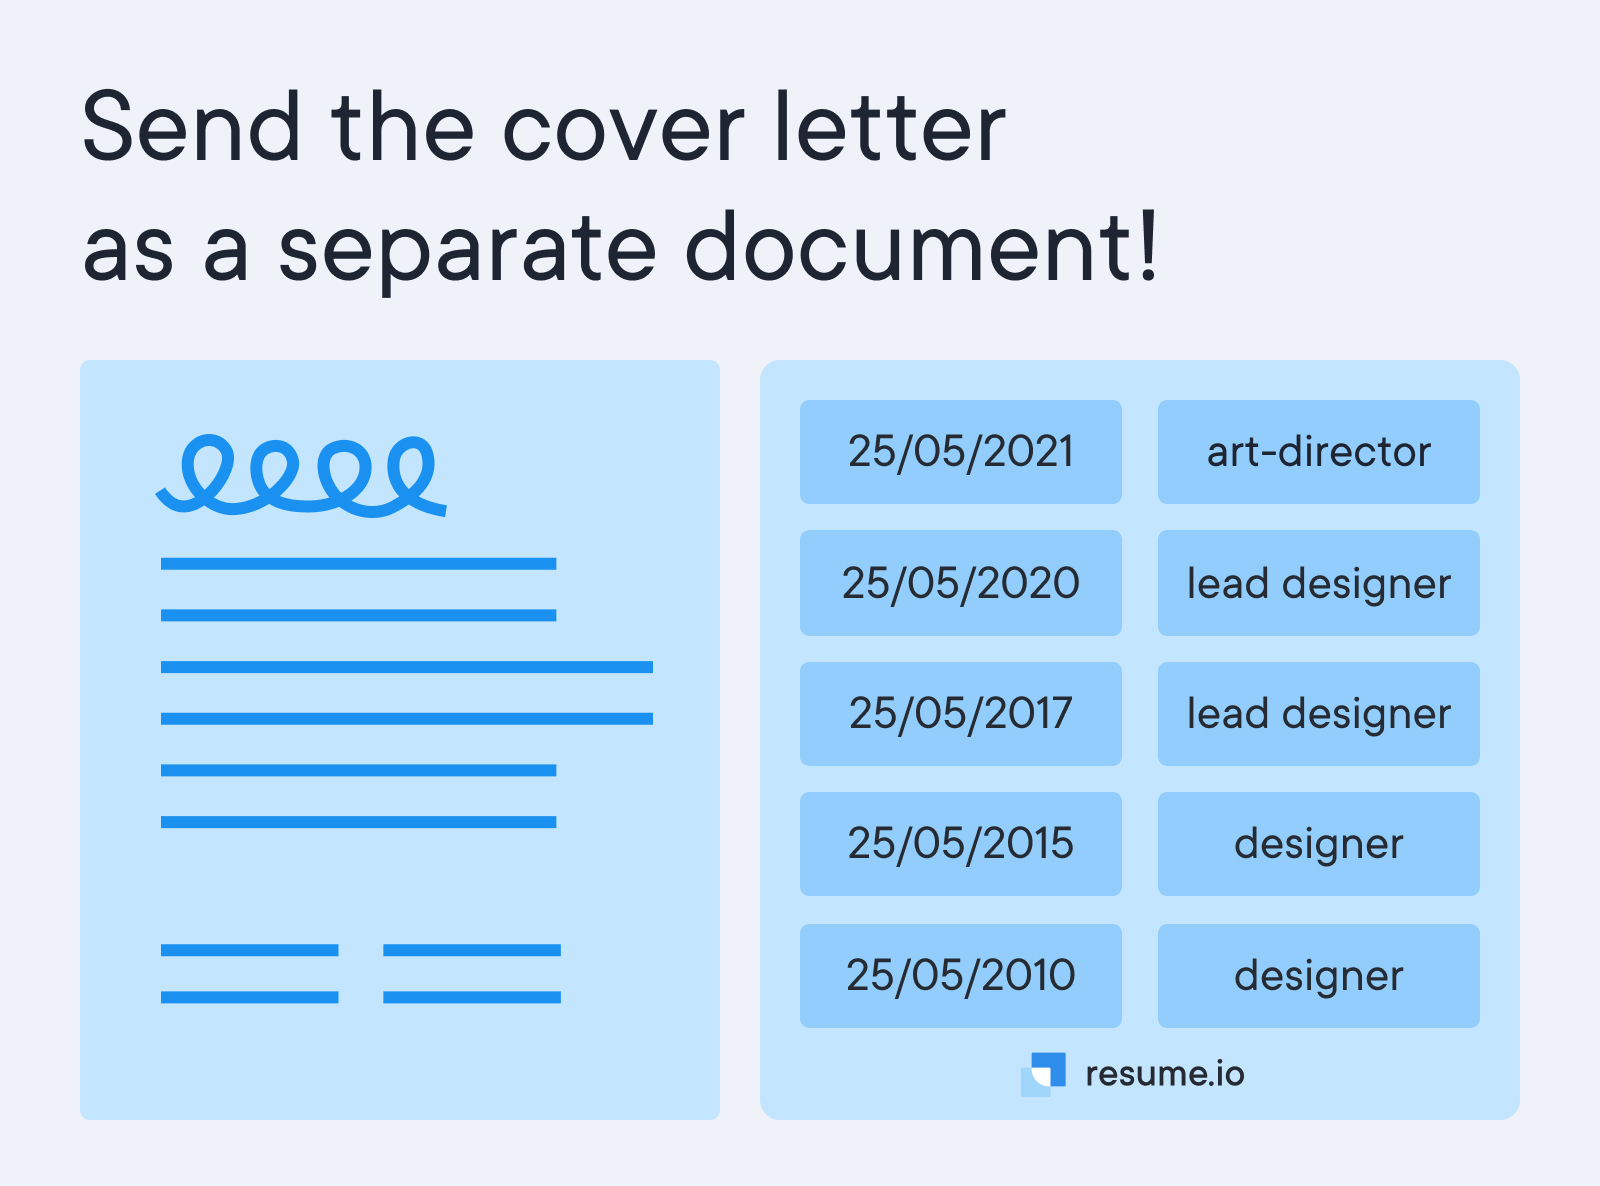 Send the cover letter as a separate document!